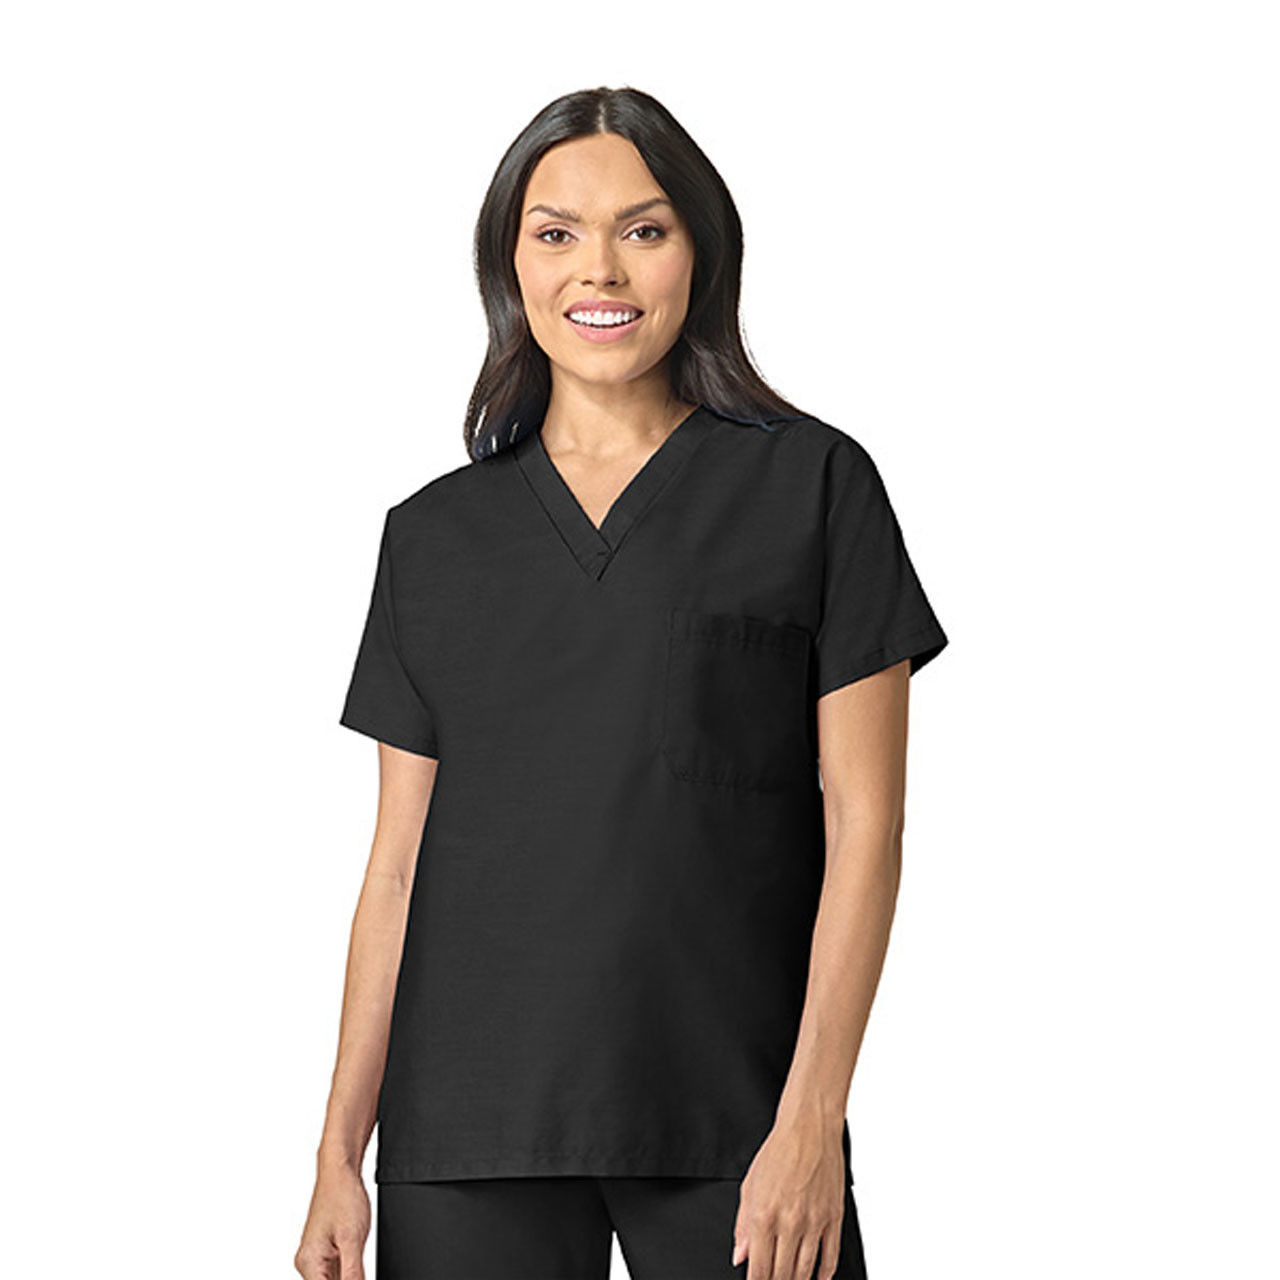 What type of neckline do the Black Scrub Tops have?